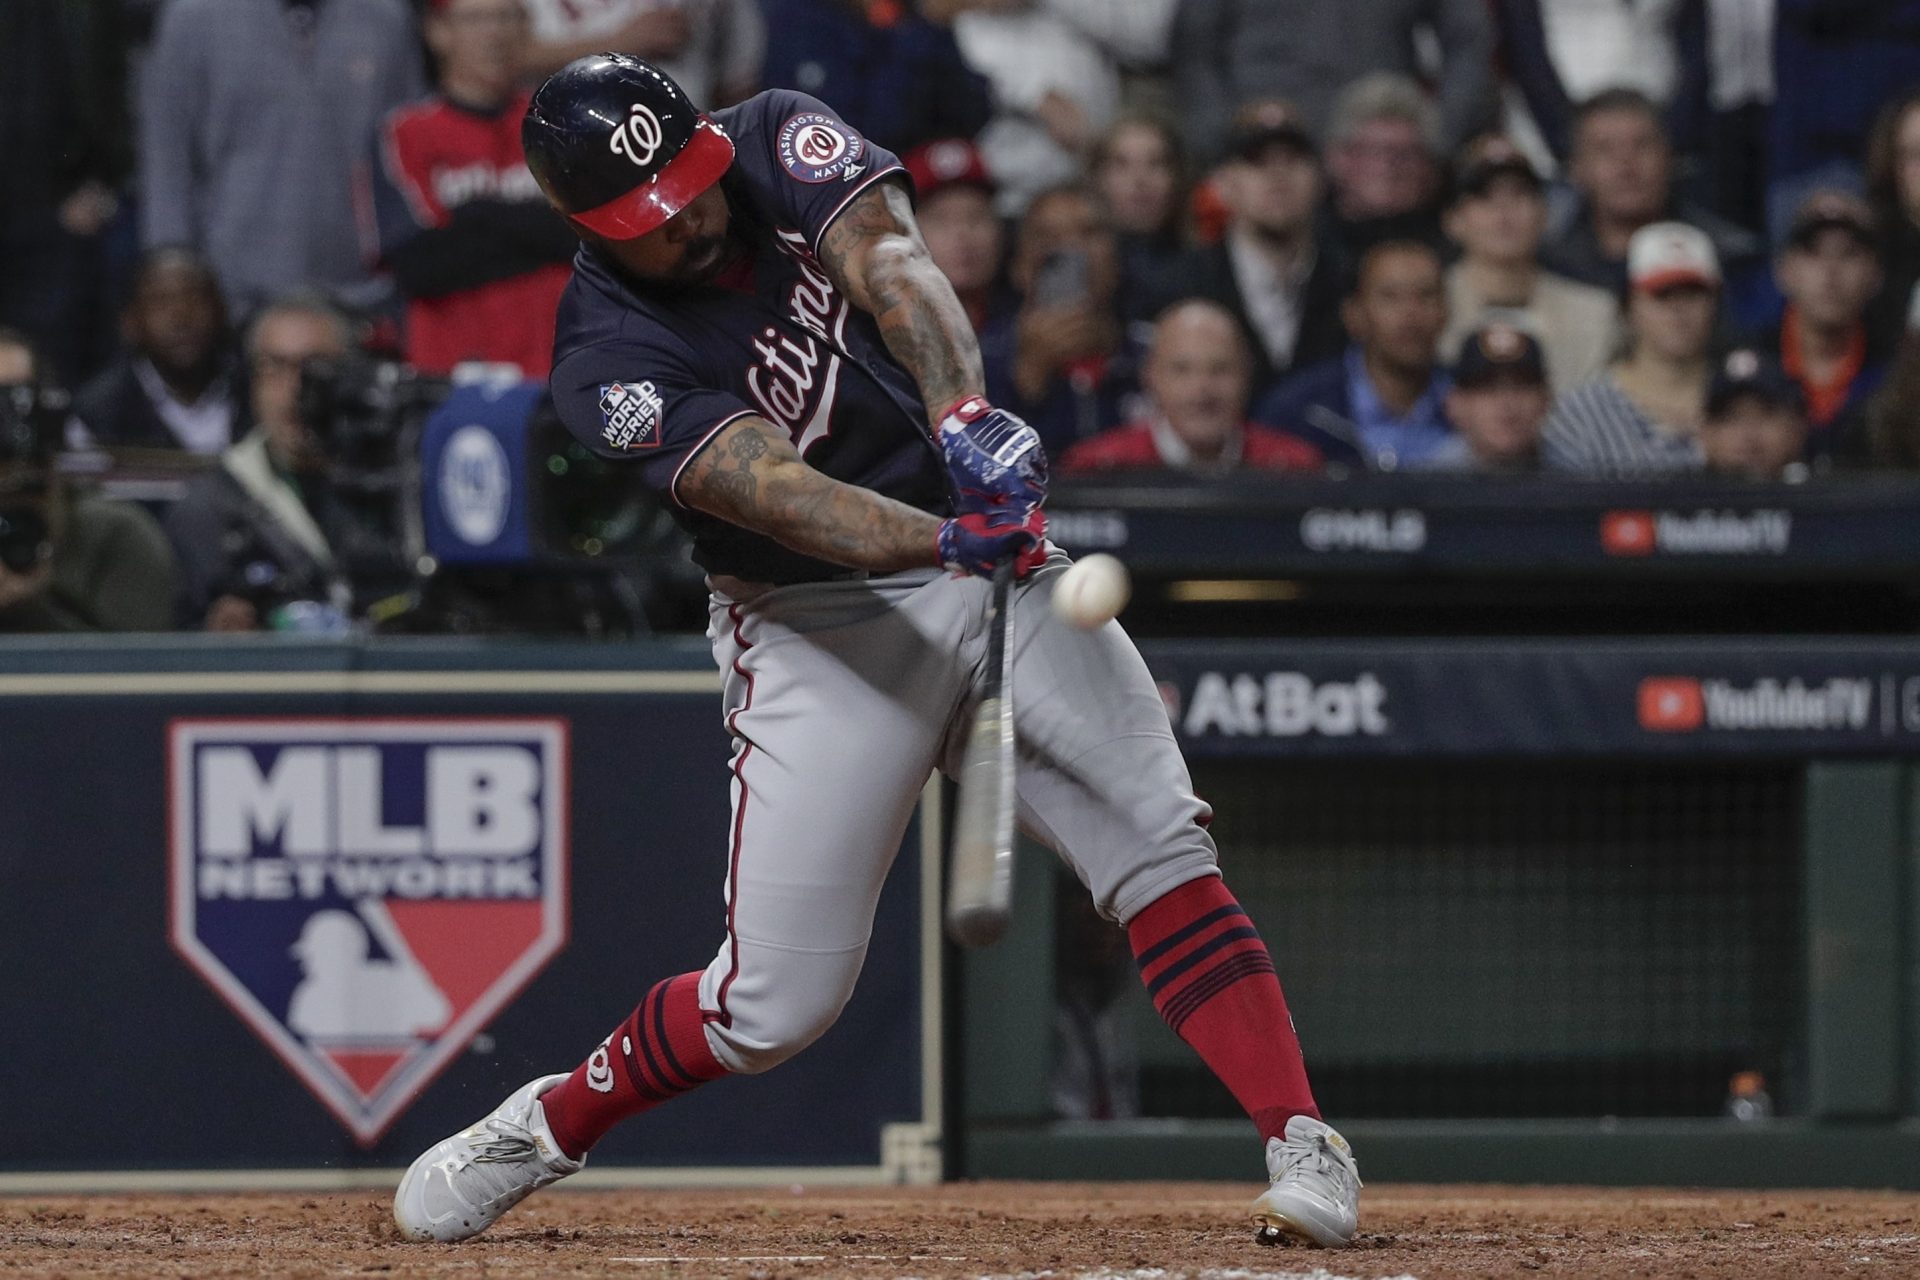 Washington Nationals' Howie Kendrick hits a two-run home run during the seventh inning of Game 7 of the baseball World Series against the Houston Astros Wednesday, Oct. 30, 2019, in Houston.